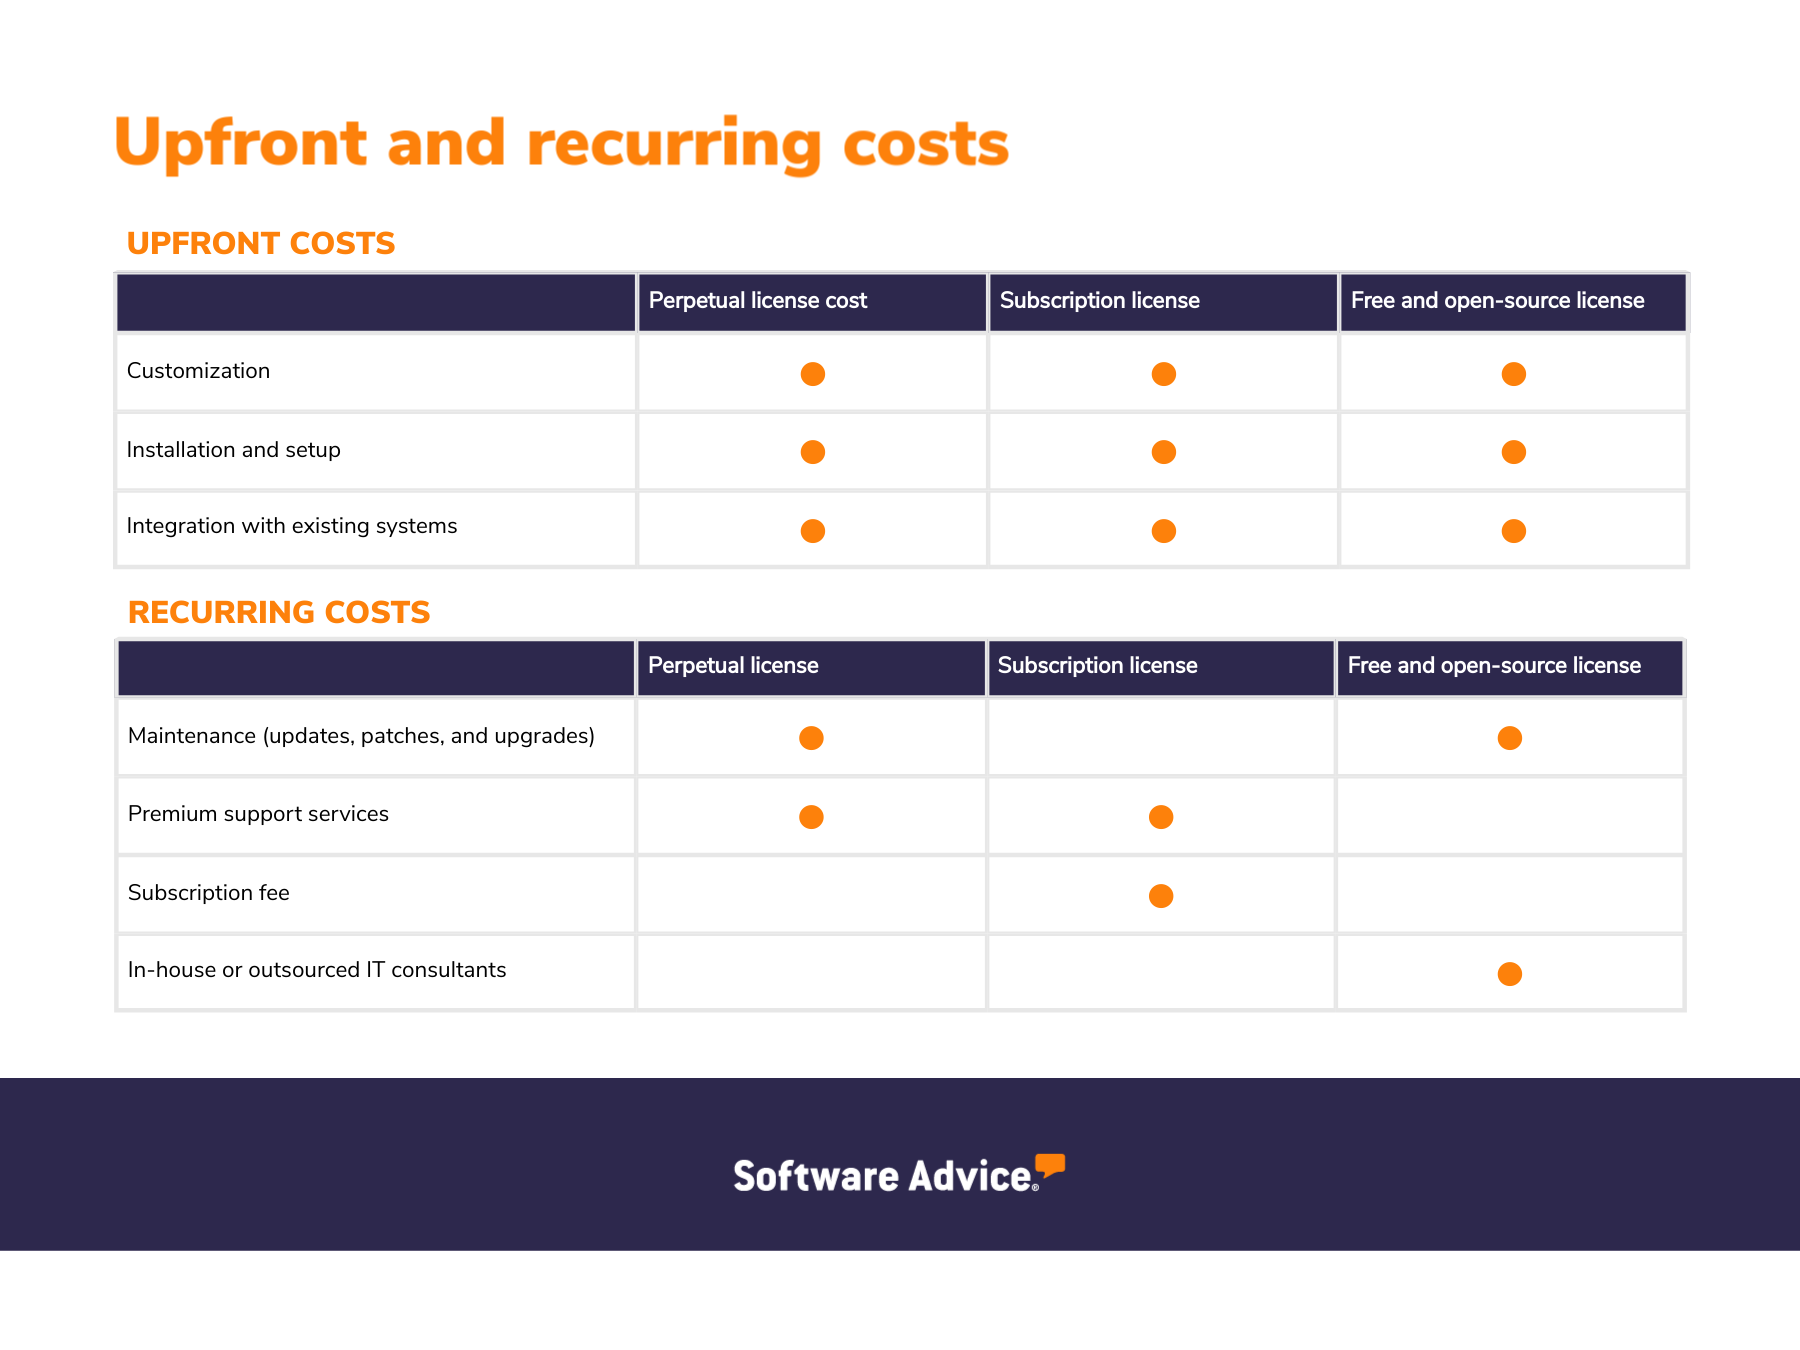 Infographic showing upfront and recurring costs of call center software